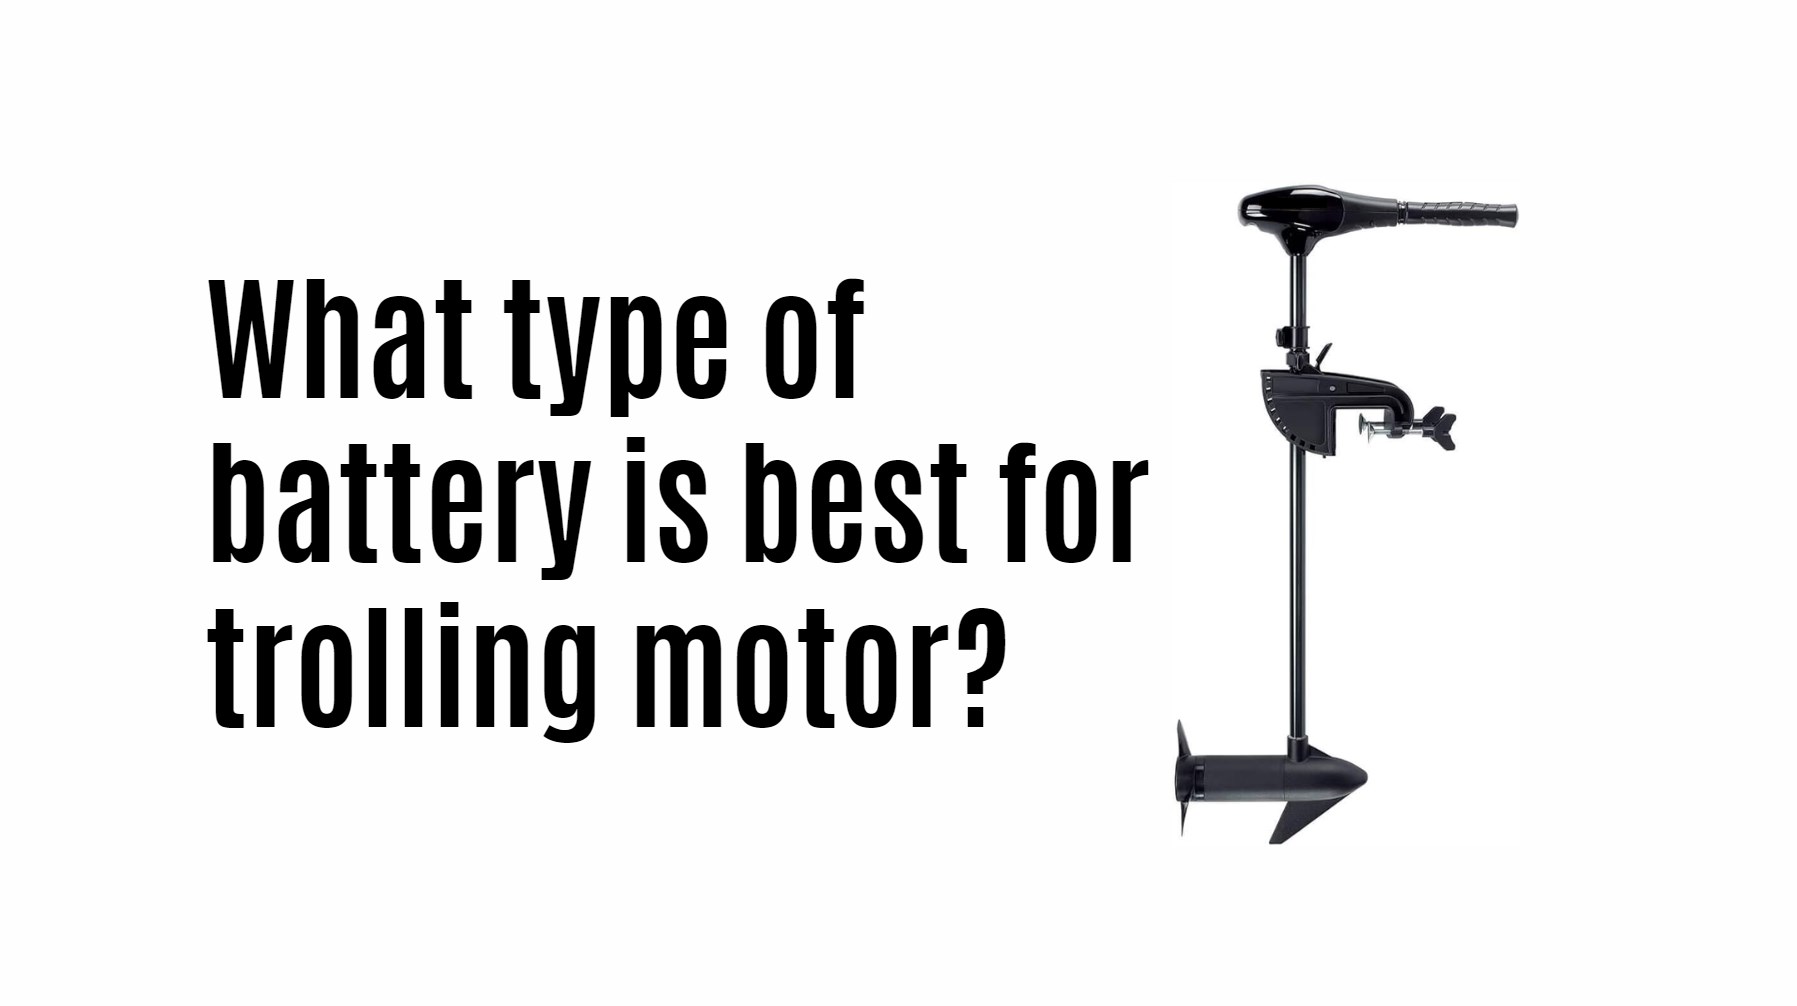 What type of battery is best for trolling motor?